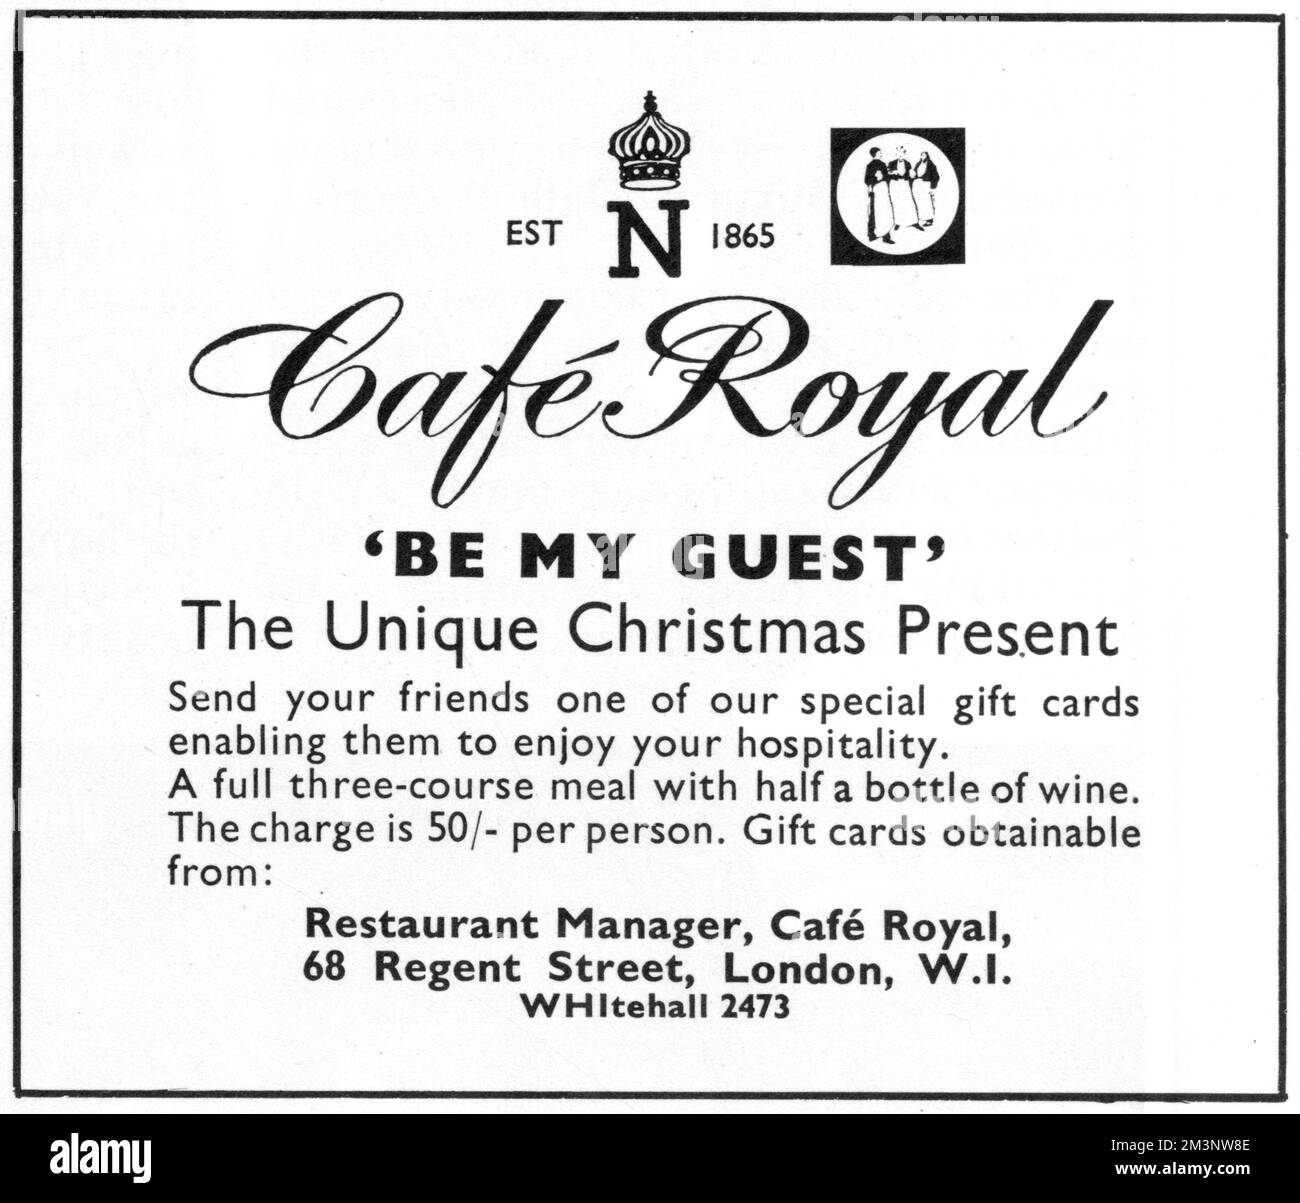 Advertisement for the Cafe Royal on Regent Street, London, and in particular for gift cards as Christmas presents for friends. The ad utilises an Aubrey Beardsley illustration of three waiters that was used on the menu covers of the Cafe Royal.     Date: 1966 Stock Photo